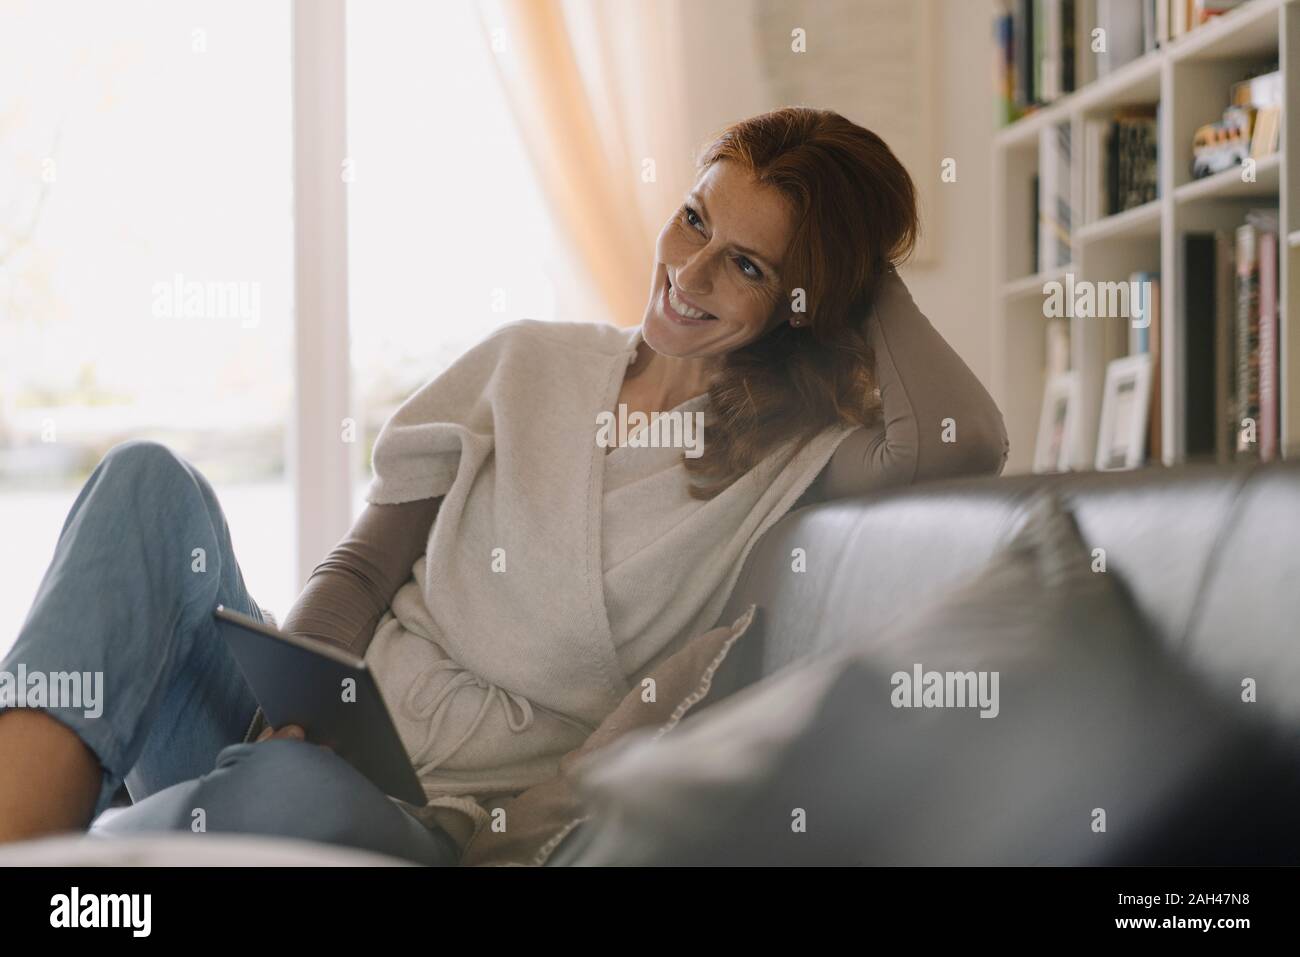 Smiling woman sitting on couch, using digital tablet Banque D'Images